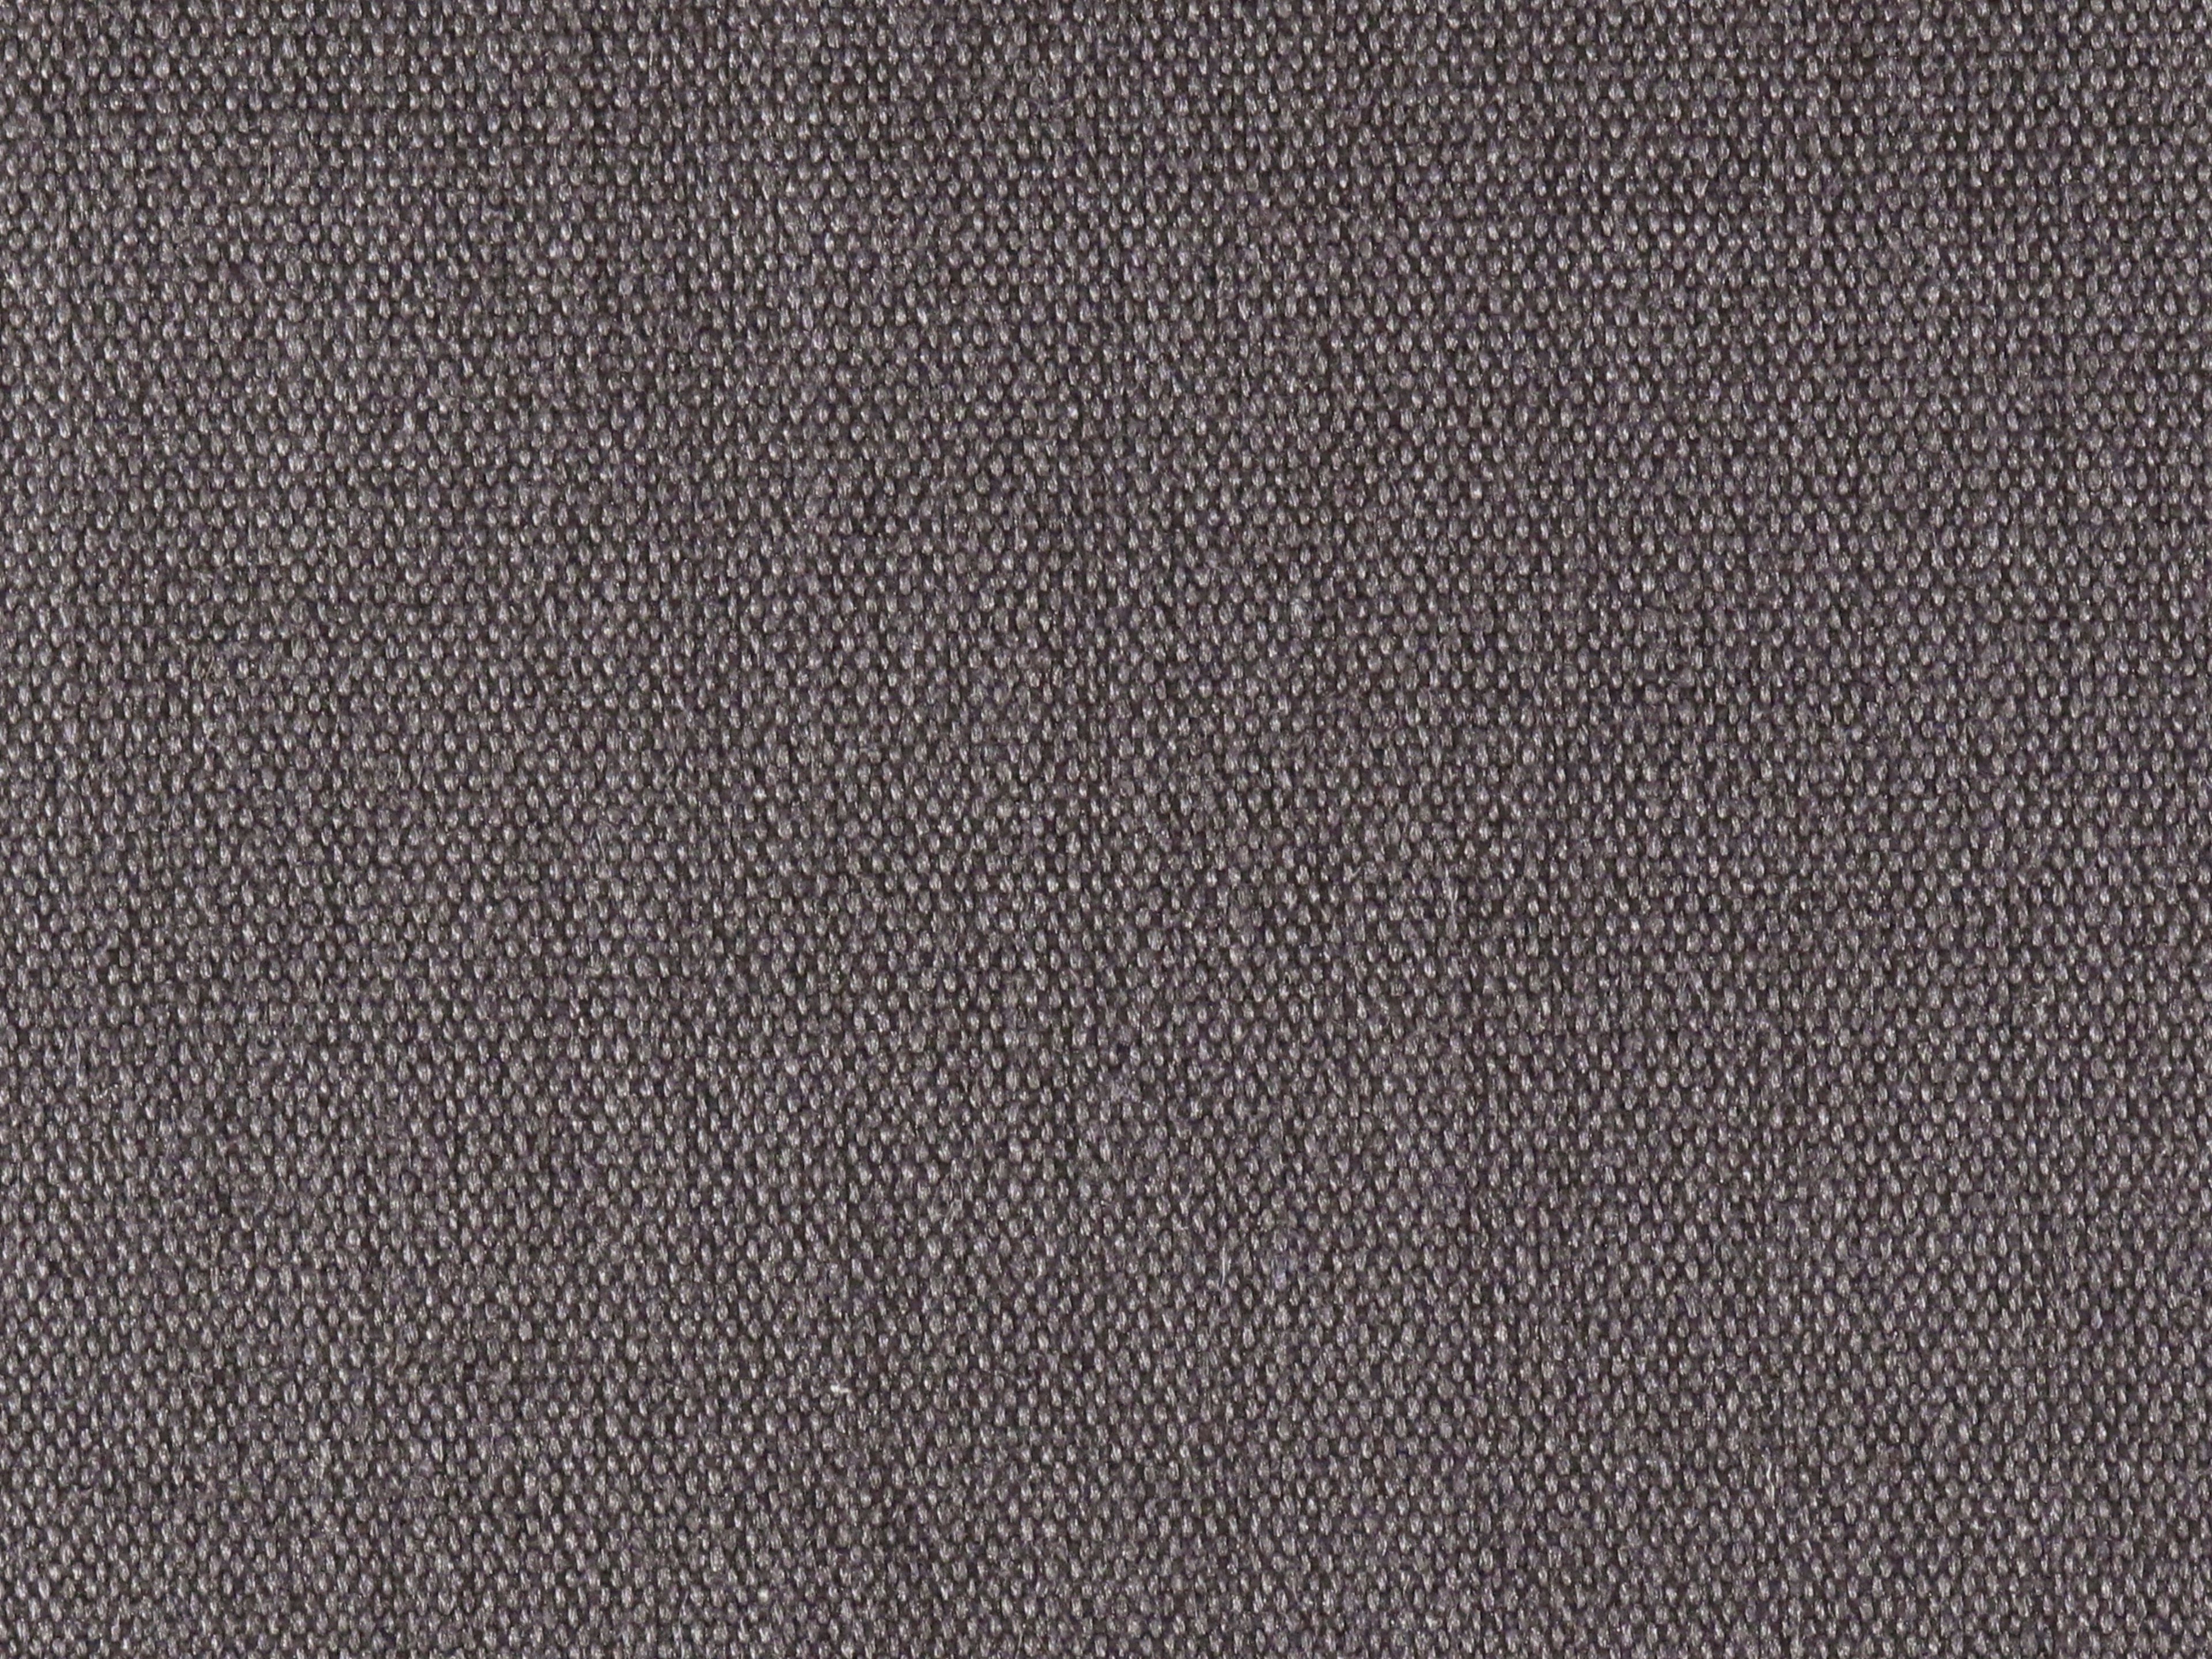 Lakeside Linen fabric in steel color - pattern number PK 0009LAKE - by Scalamandre in the Old World Weavers collection